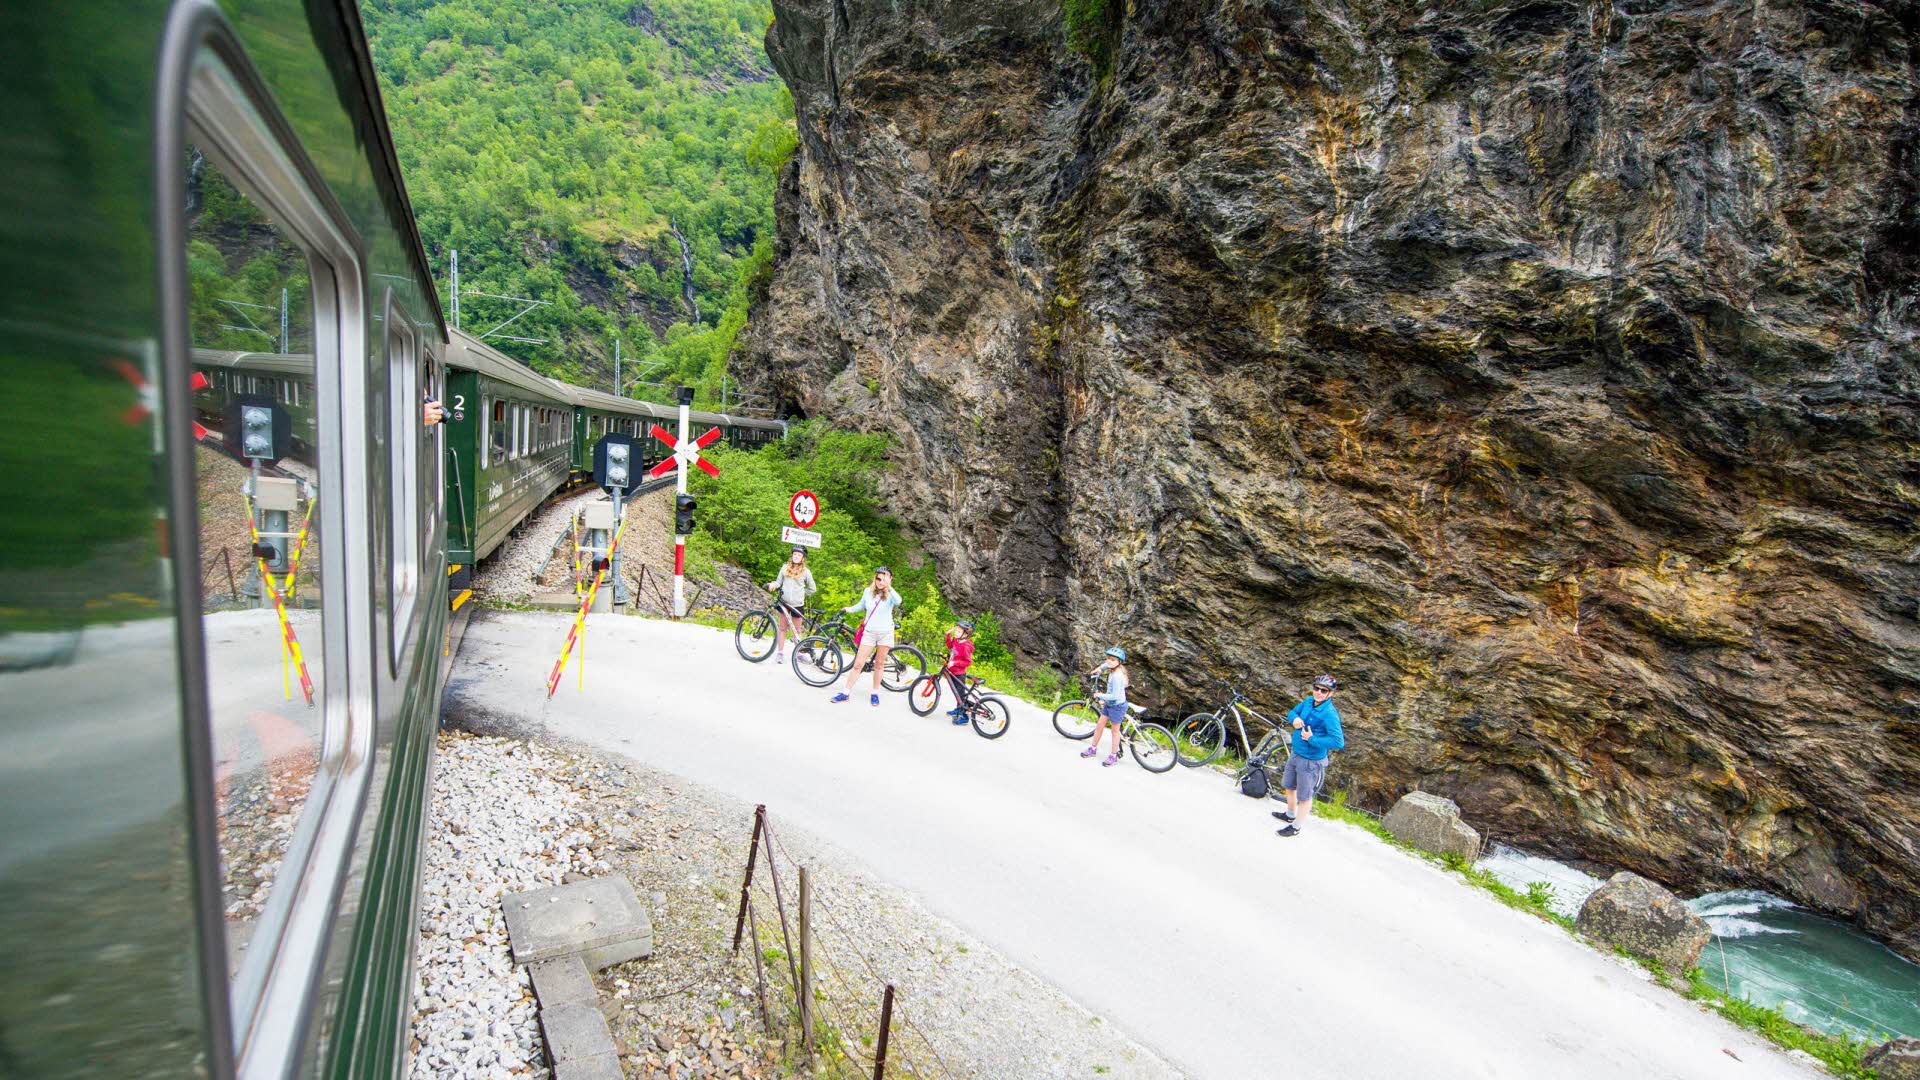 Family of 5 stops and wait on their bikes on gravel road in the Flam valley as The Flam Railway passes in summer